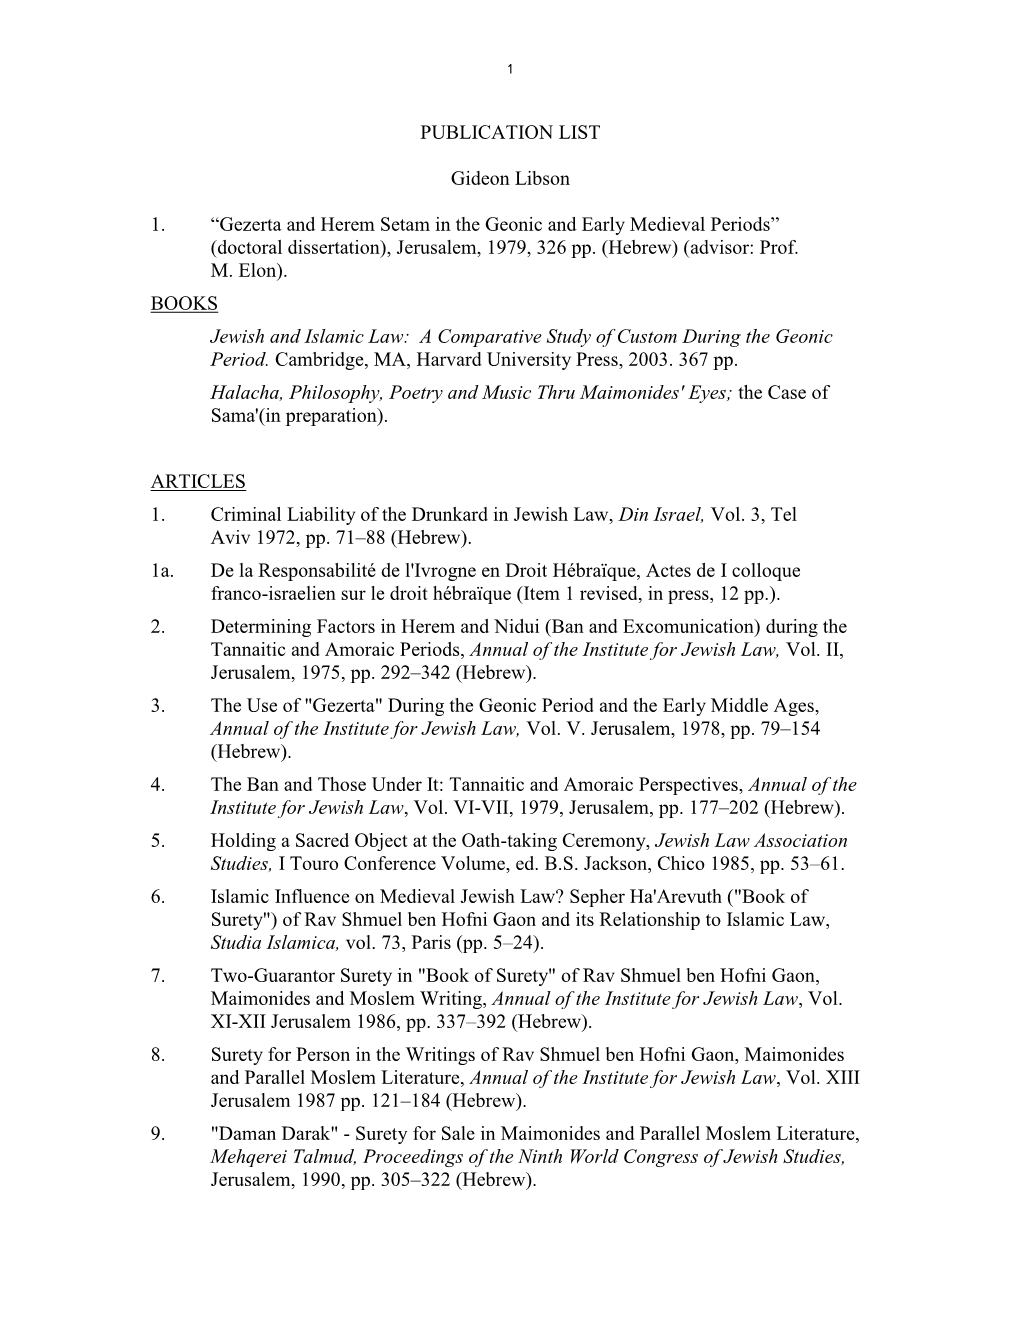 PUBLICATION LIST Gideon Libson 1. “Gezerta and Herem Setam in the Geonic and Early Medieval Periods” (Doctoral Dissertation)